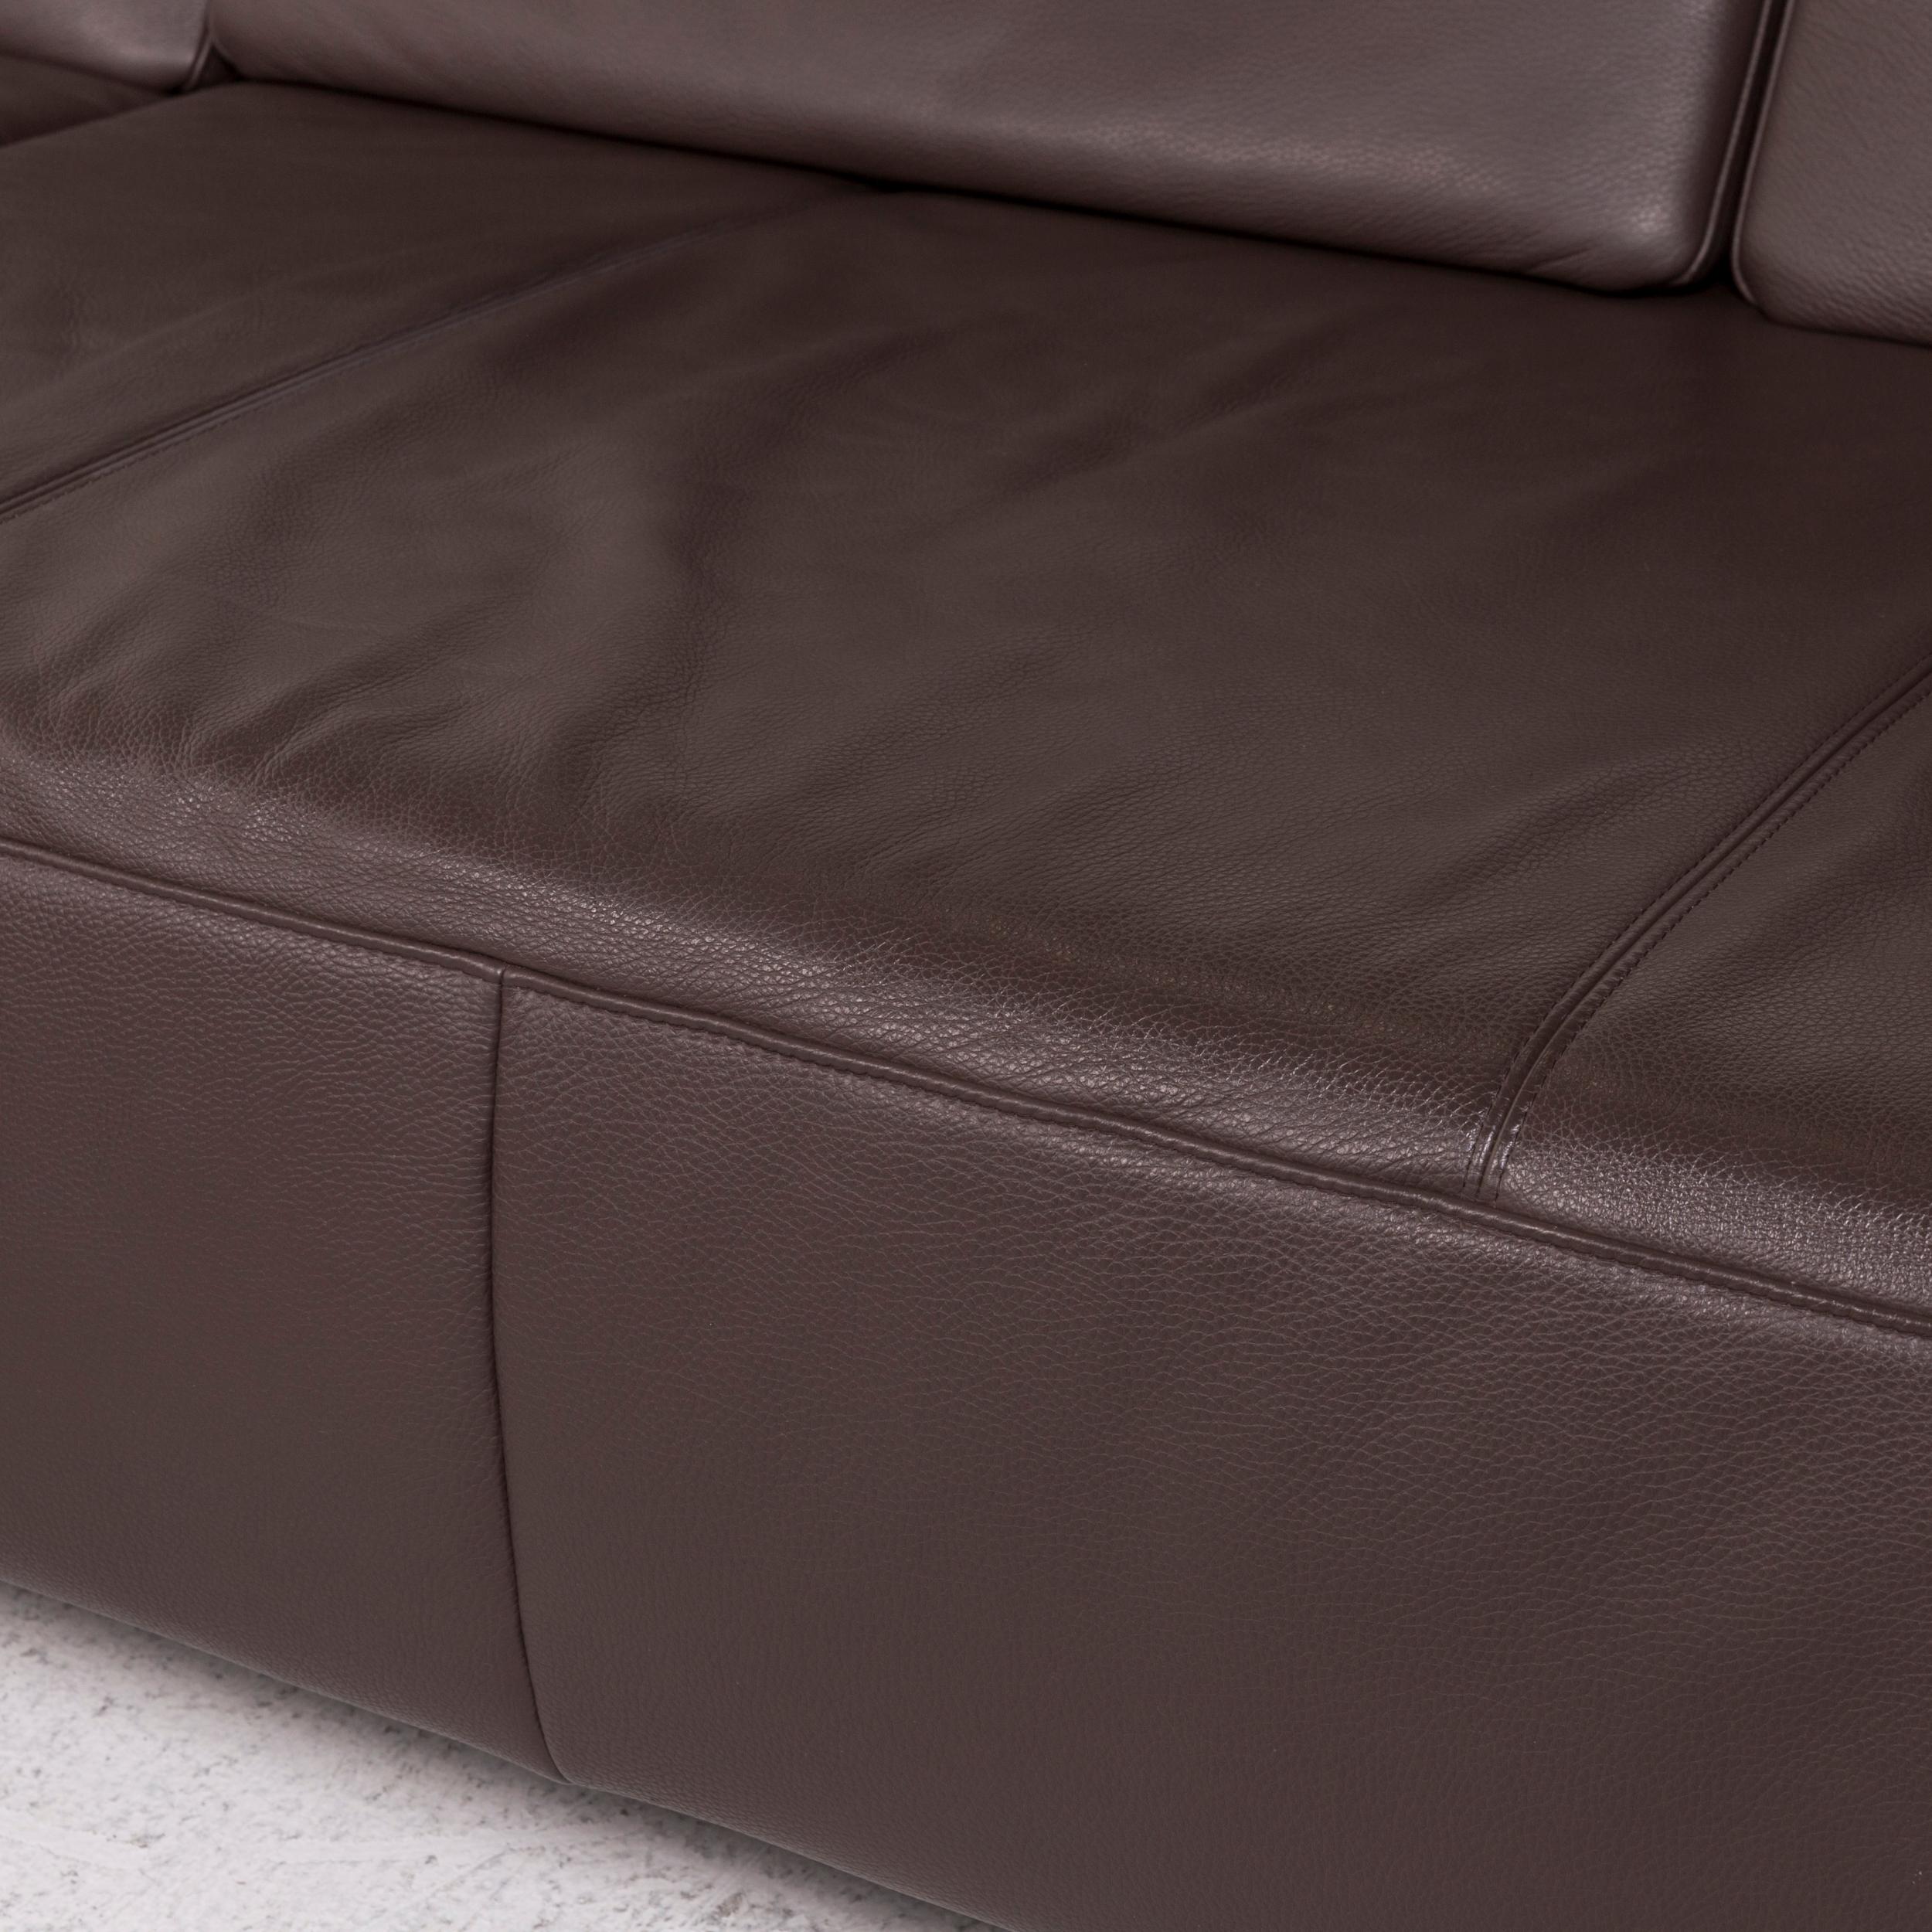 We bring to you an Ewald Schillig leather corner sofa brown dark brown sofa couch.
  
 

 Product measurements in centimeters:
 

Depth 120
Width 160
Height 75
Seat-height 43
Rest-height 68
Seat-depth 130
Seat-width 214
Back-height 36.